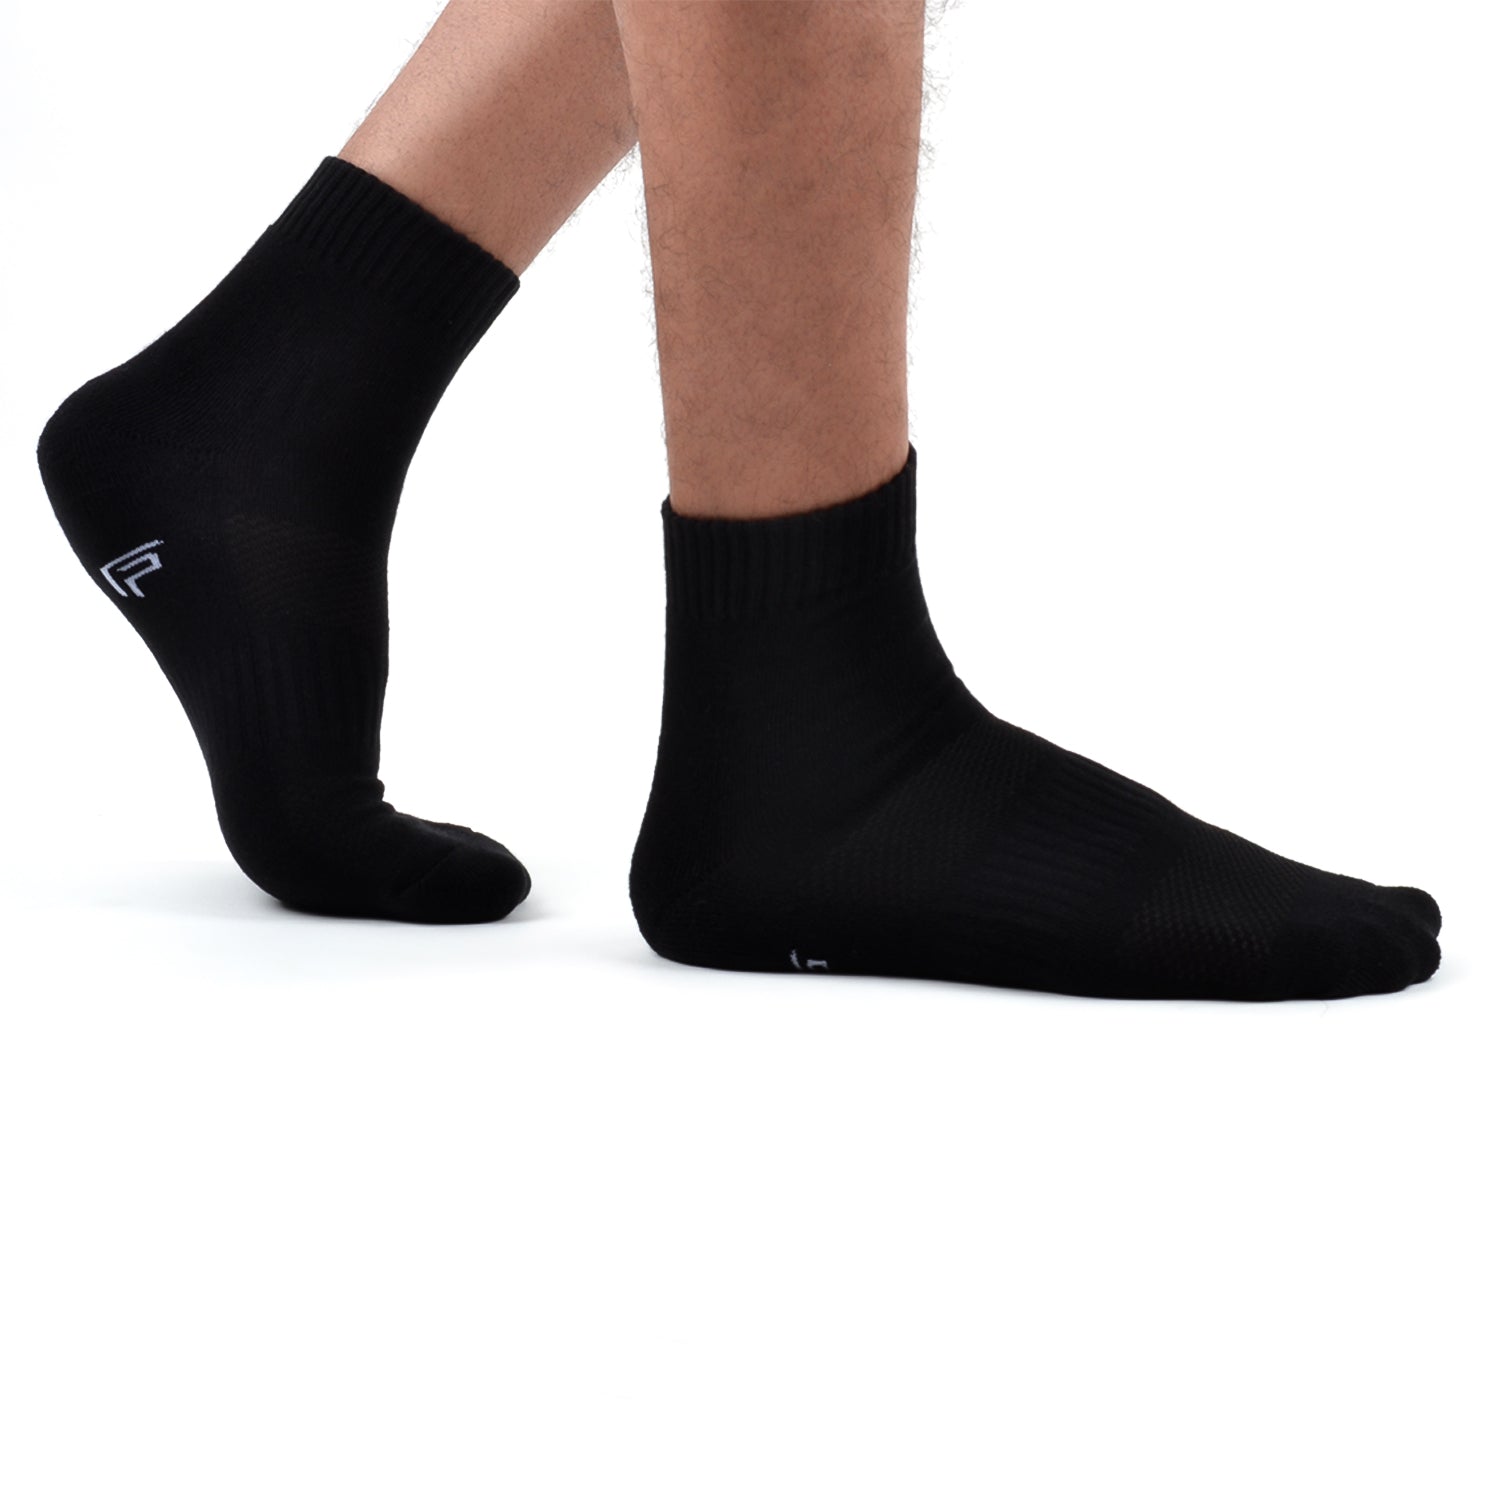 FOOTPRINTS Unisex Solid Cotton Ankle Terry & Formal-Length Socks -Pack Of 3